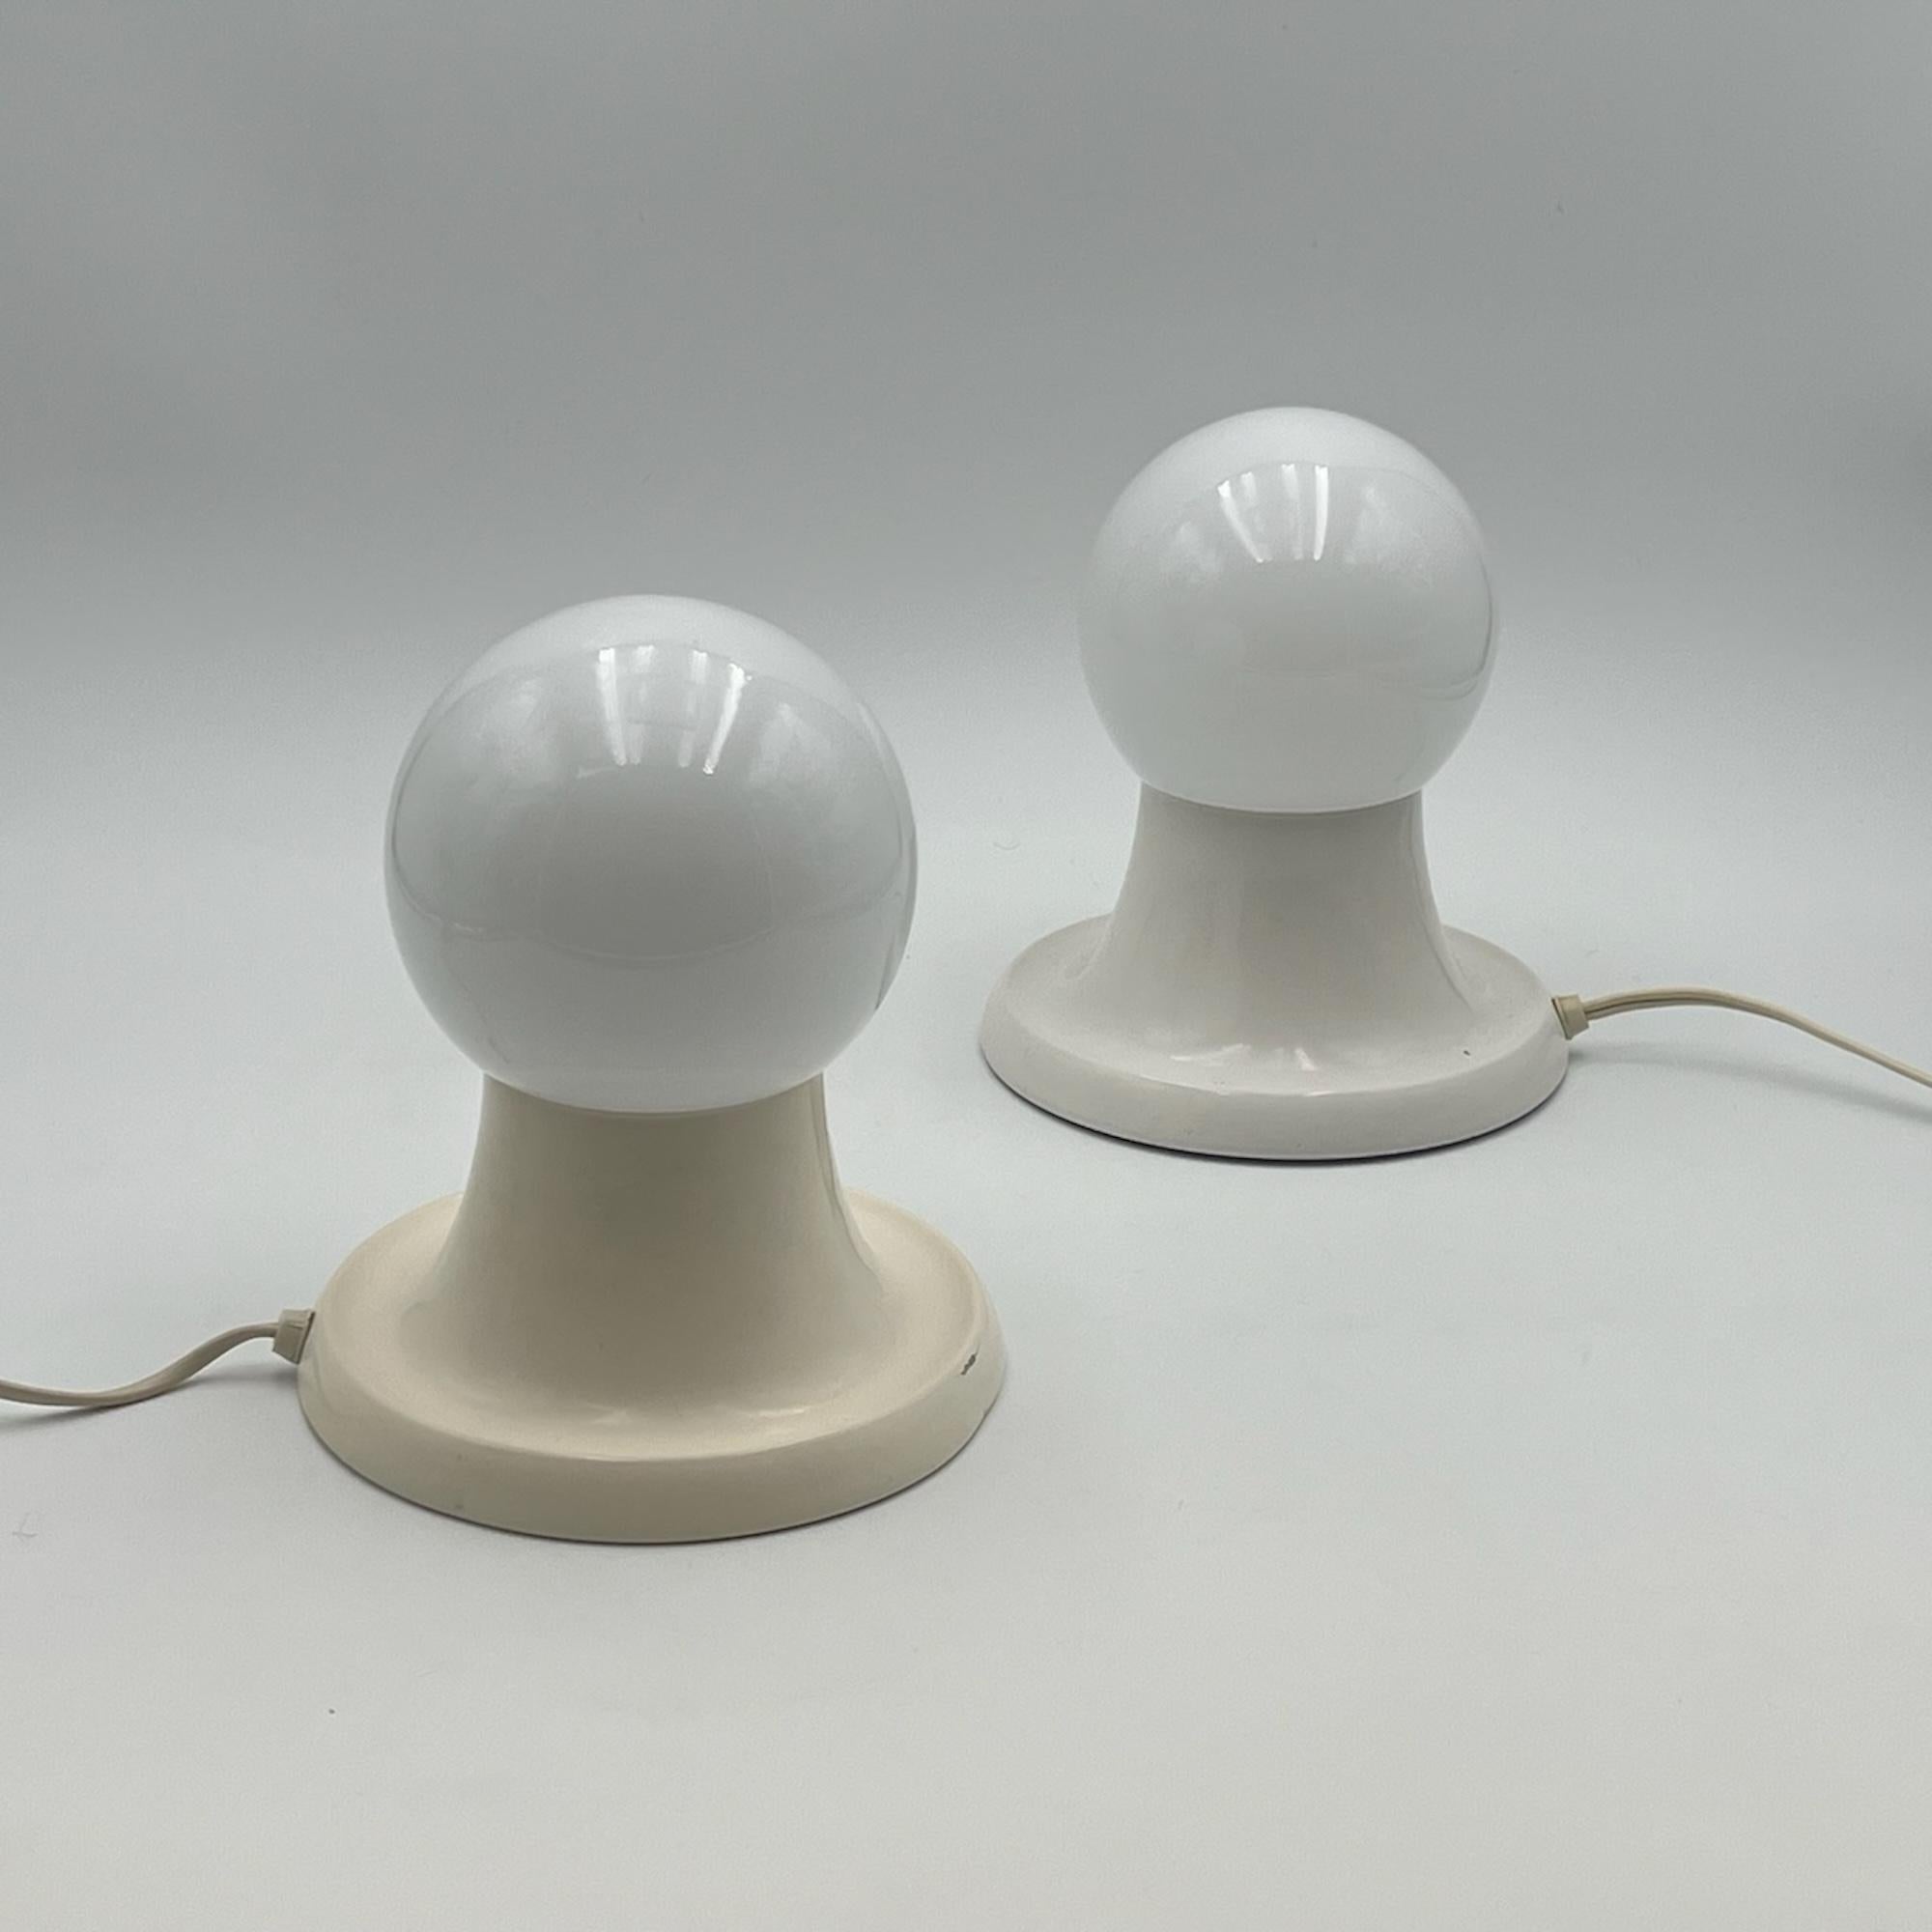 Italian Iconic pair of FLOS 'Light Ball' table lamps Castiglioni Design, 1960s For Sale